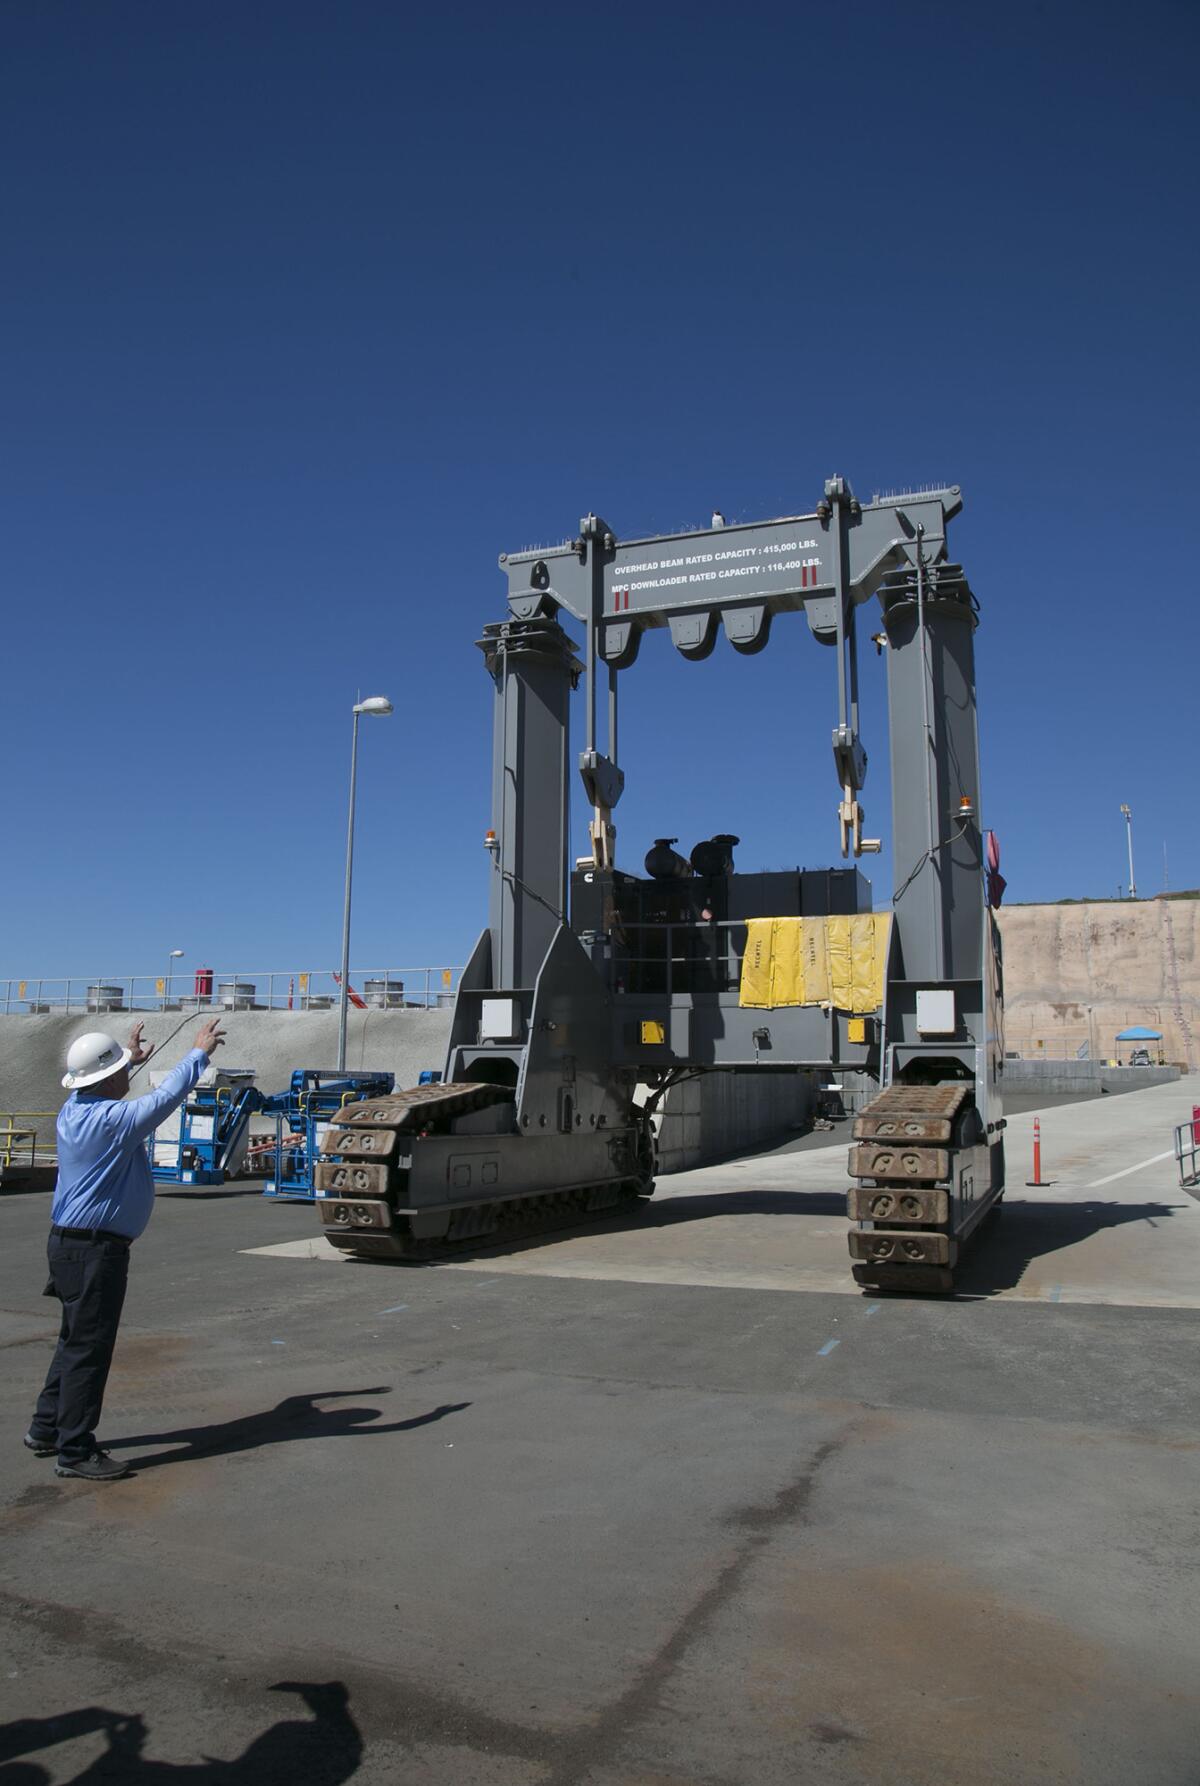 Jim Peattie, General Manager for Decommissioning Oversight, demonstrates in March 2019 how this specialized crane is used to lower the canisters holding spent nuclear fuel into underground cavities at a newly constructed storage facility at the now-shuttered San Onofre Nuclear Generating Station.